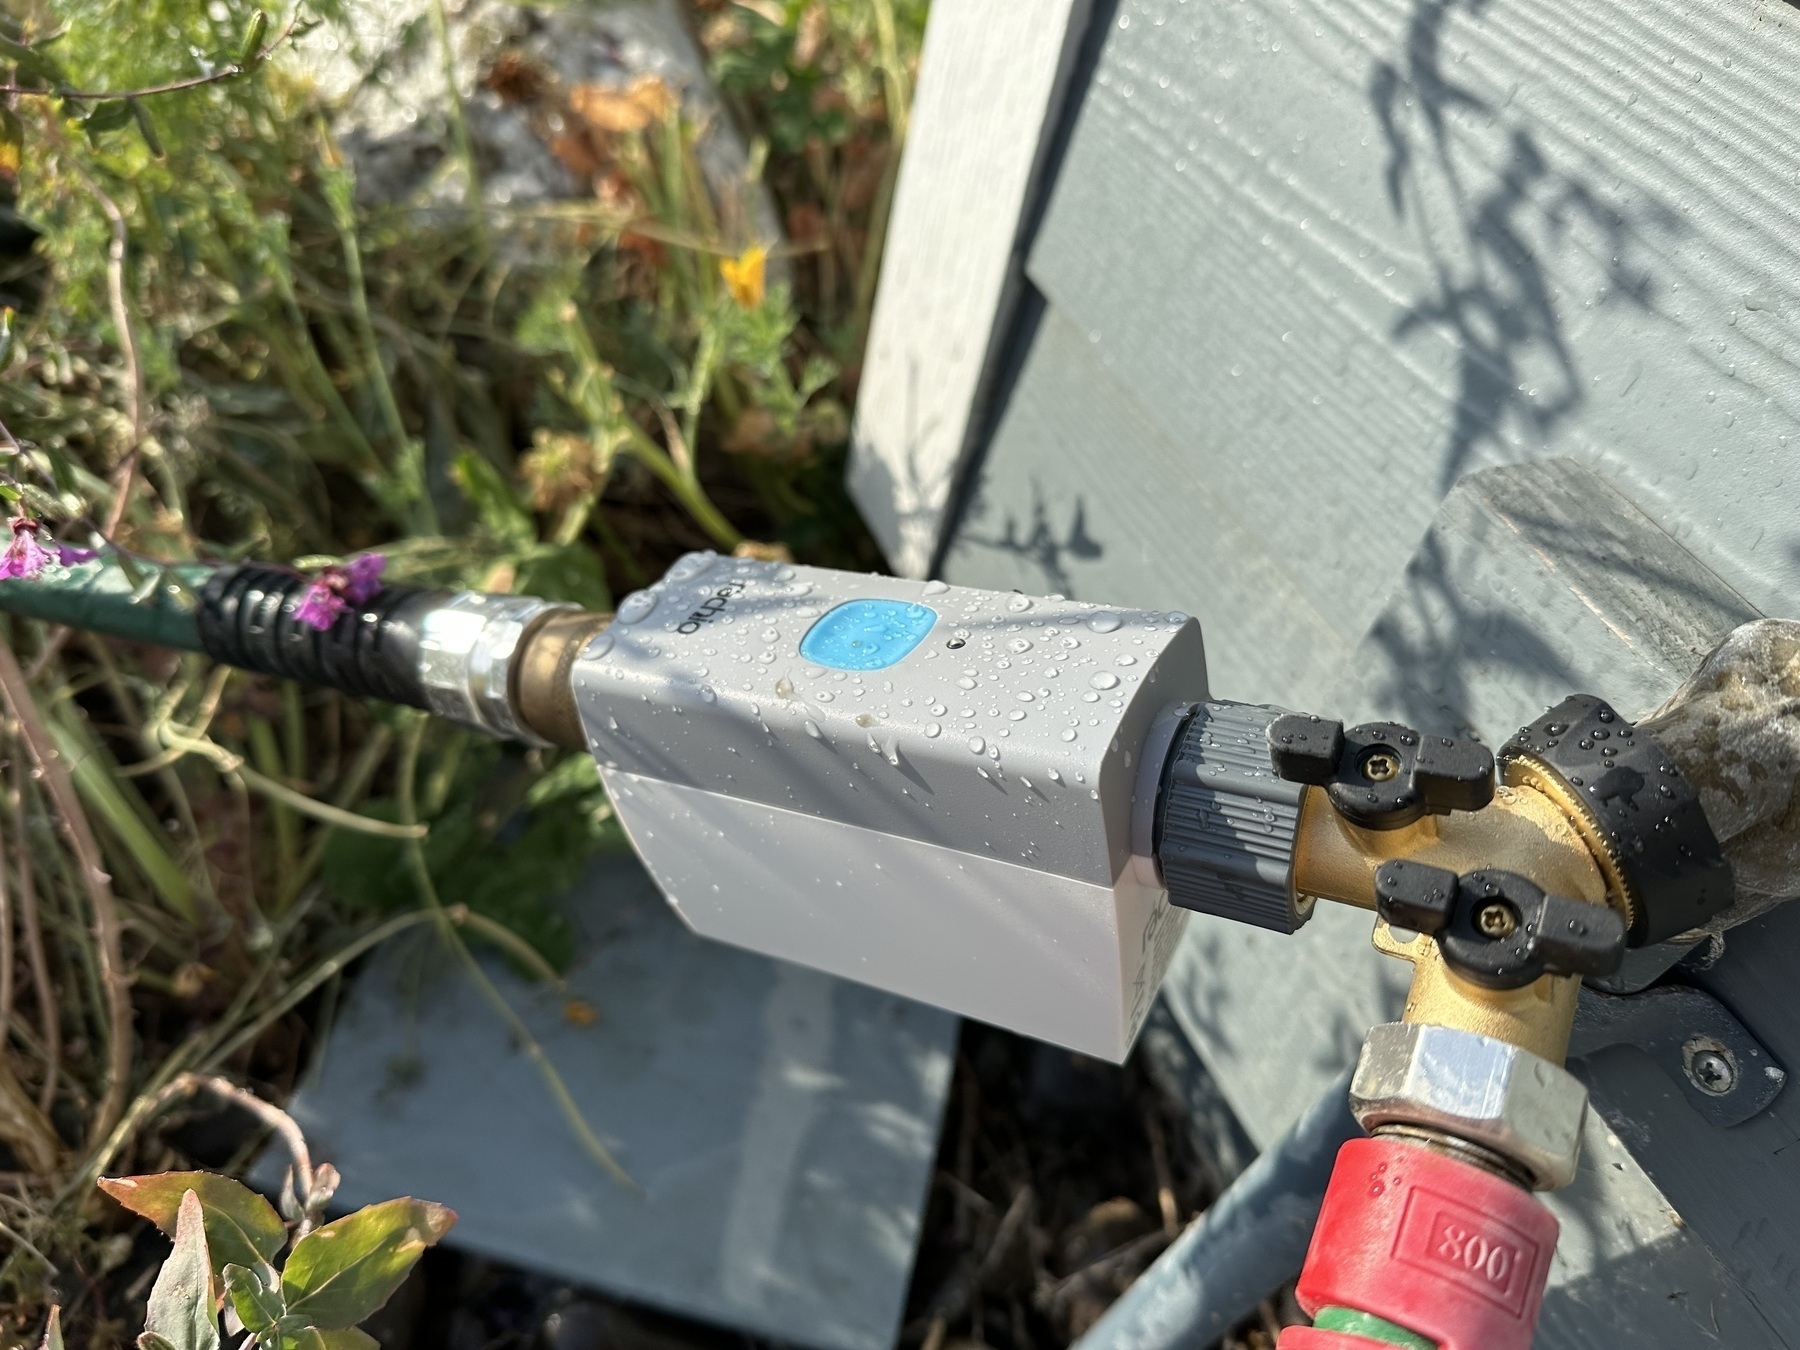 The grey and white Rachio hose sprinkler timer. It is outdoors and connected to a Y spigot. There’s a back flow preventer and a hose attached to it. It has some water on it.